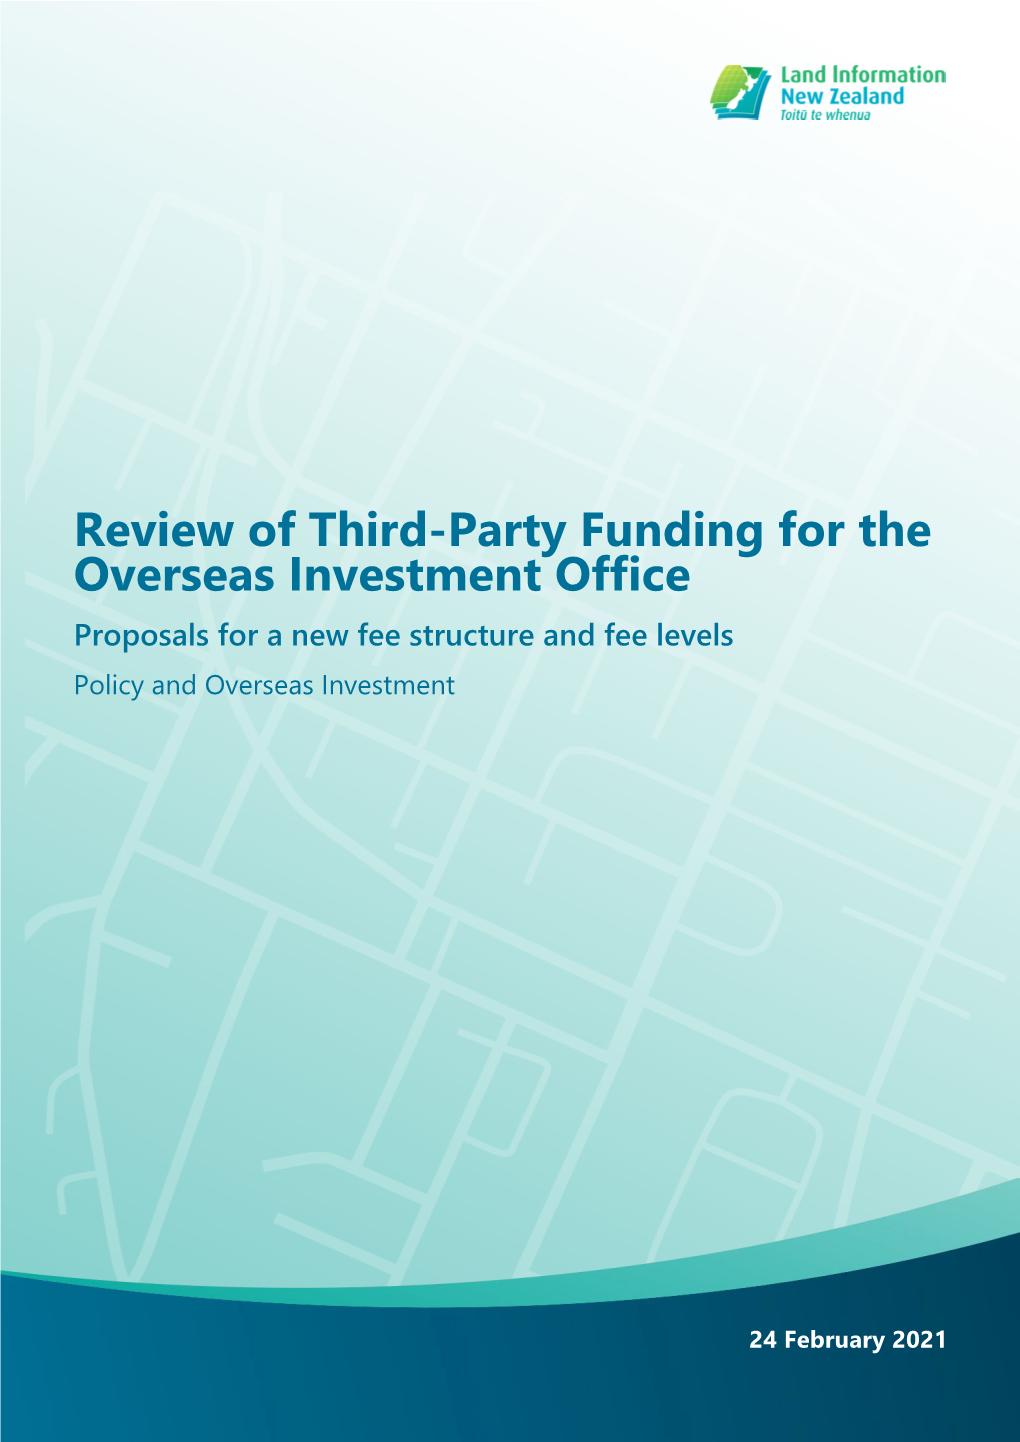 Review of Third-Party Funding for the Overseas Investment Office Proposals for a New Fee Structure and Fee Levels Policy and Overseas Investment